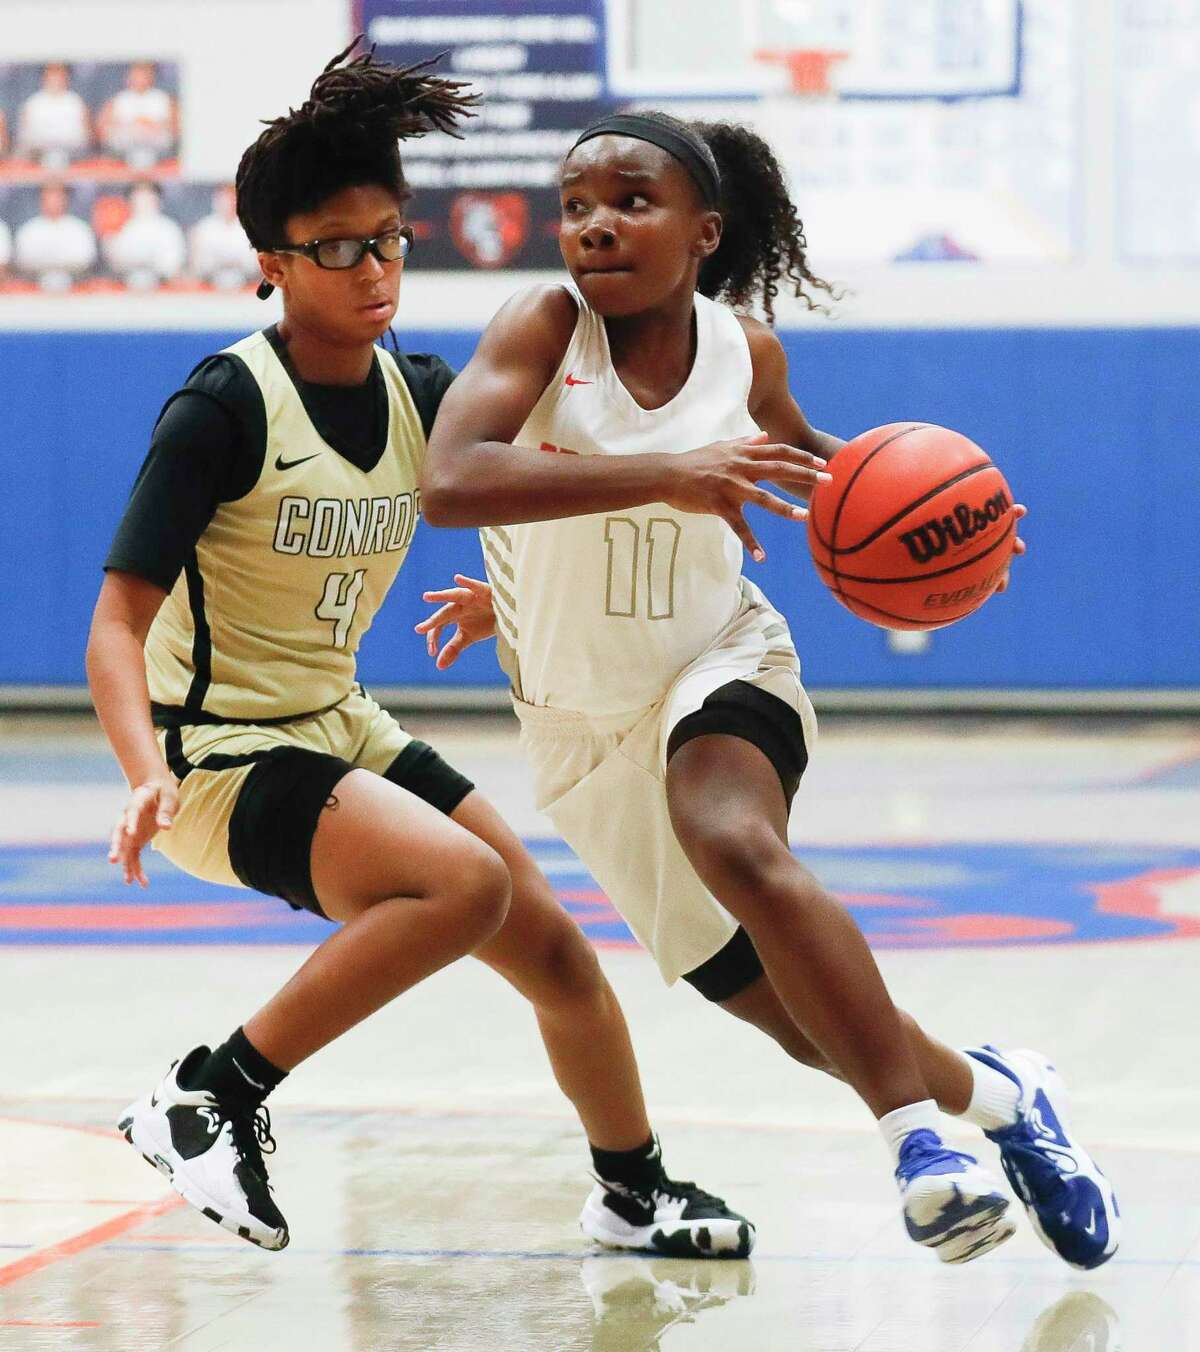 Grand Oaks' Bree Riley (11) drives past Conroe's Alana Harris (4) during the first quarter of a high school basketball game at Grand Oaks High School, Wednesday, Feb. 2, 2022.